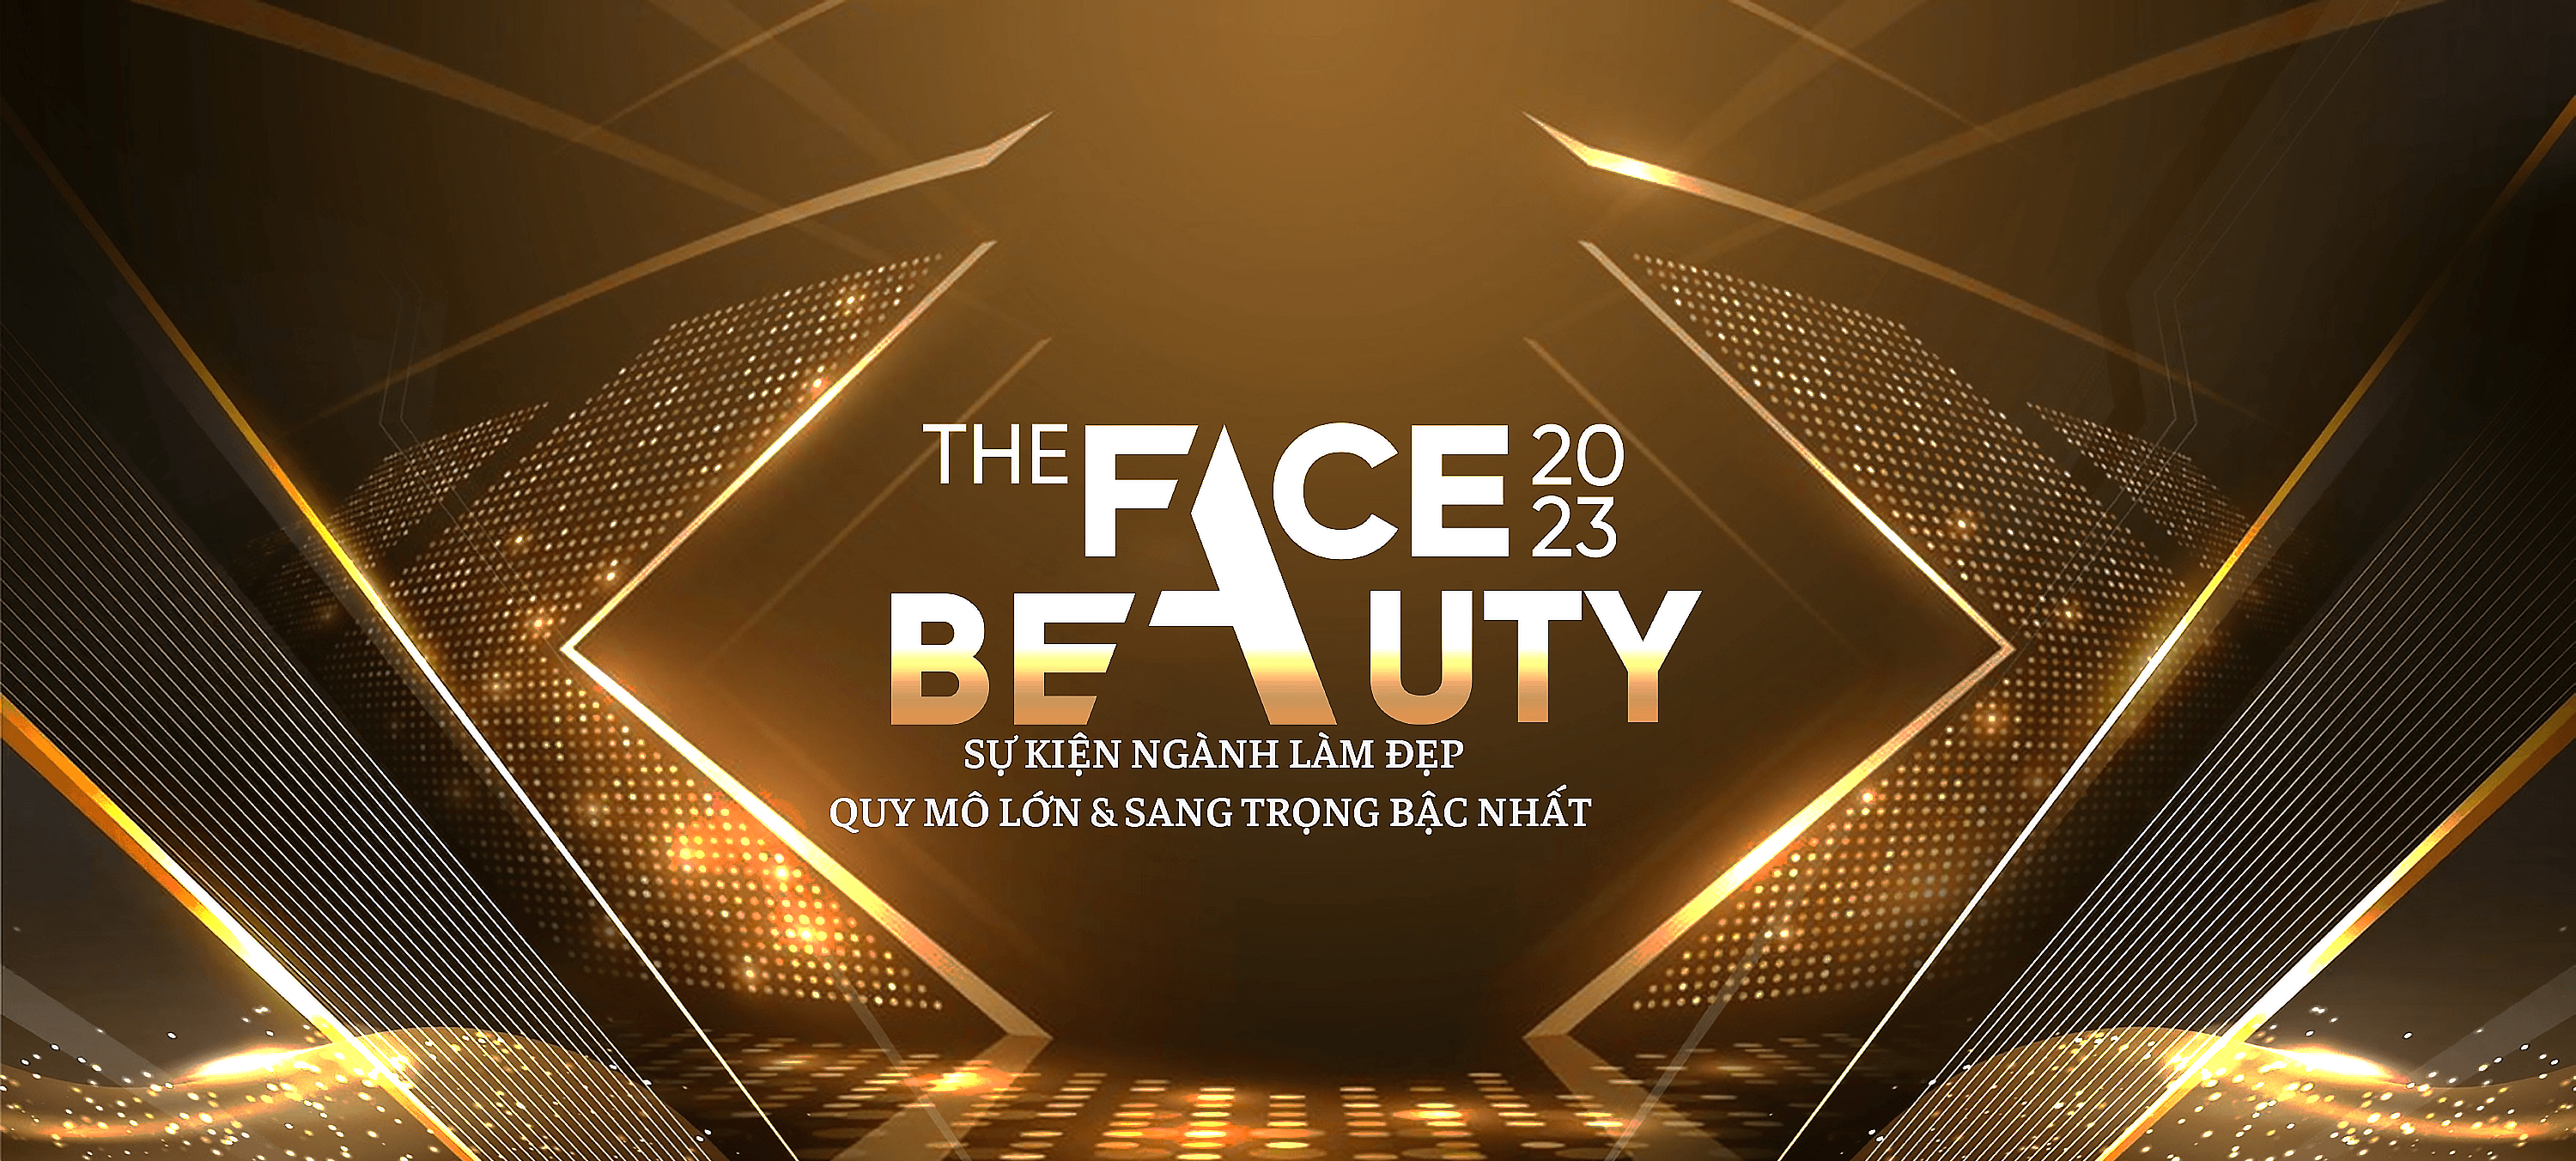 The face beauty